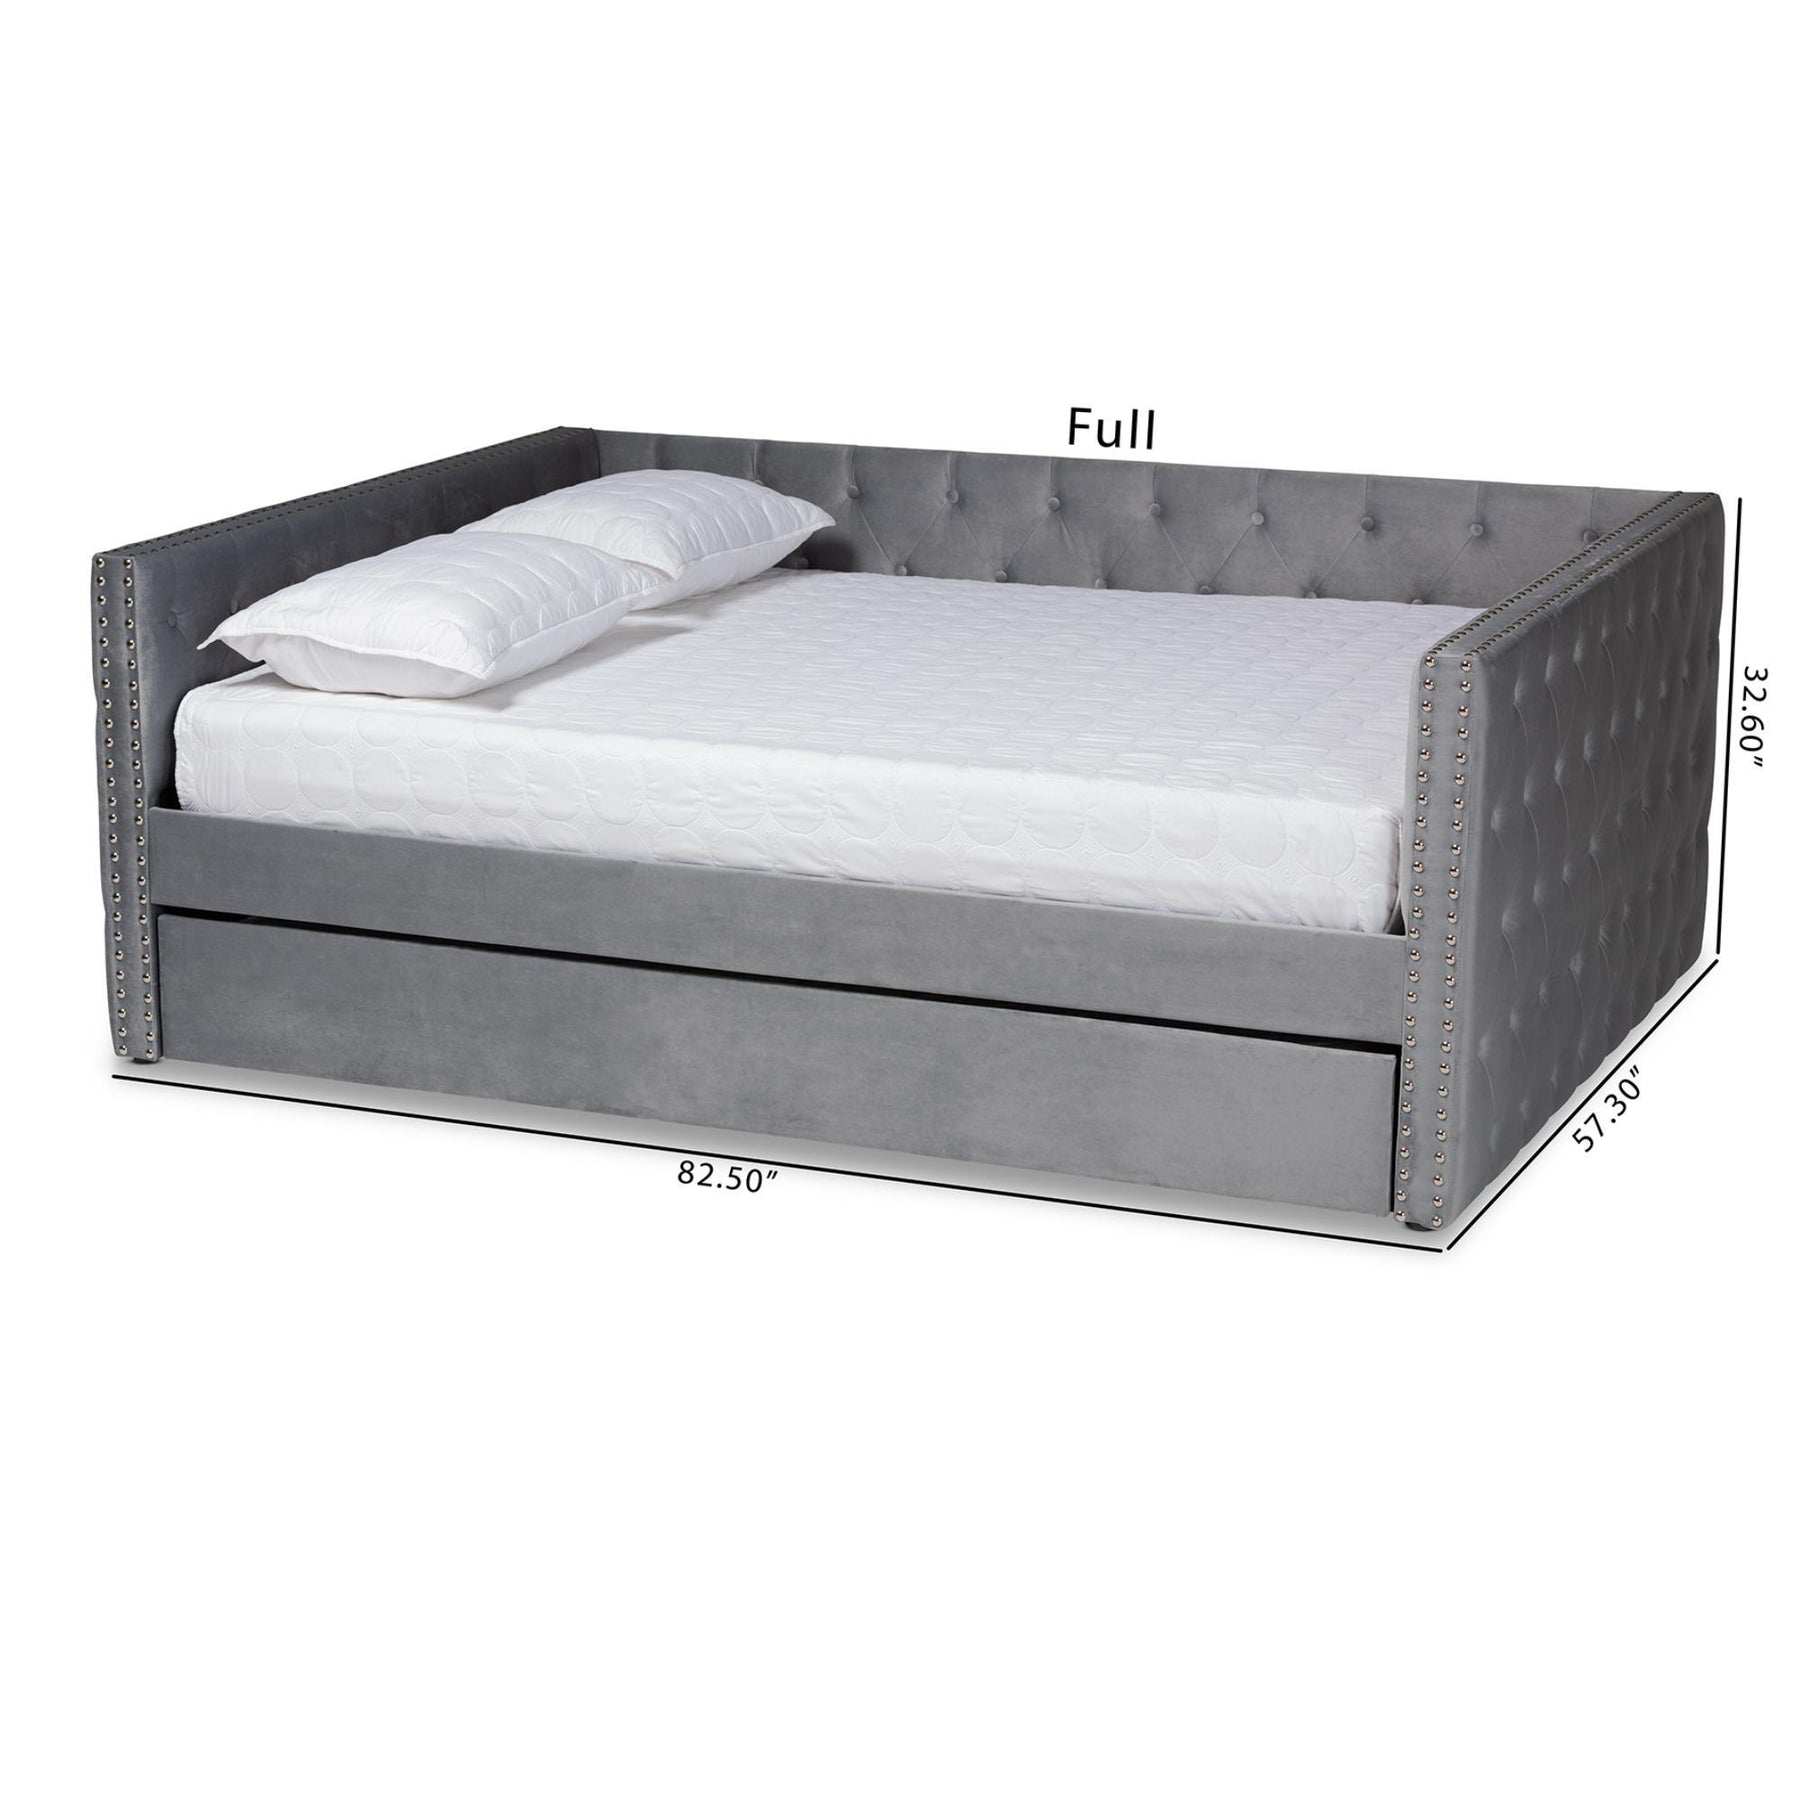 Baxton Studio Larkin Modern And Contemporary Grey Velvet Fabric Upholstered Full Size Daybed With Trundle - CF9227-Silver Grey Velvet-Daybed-F/T